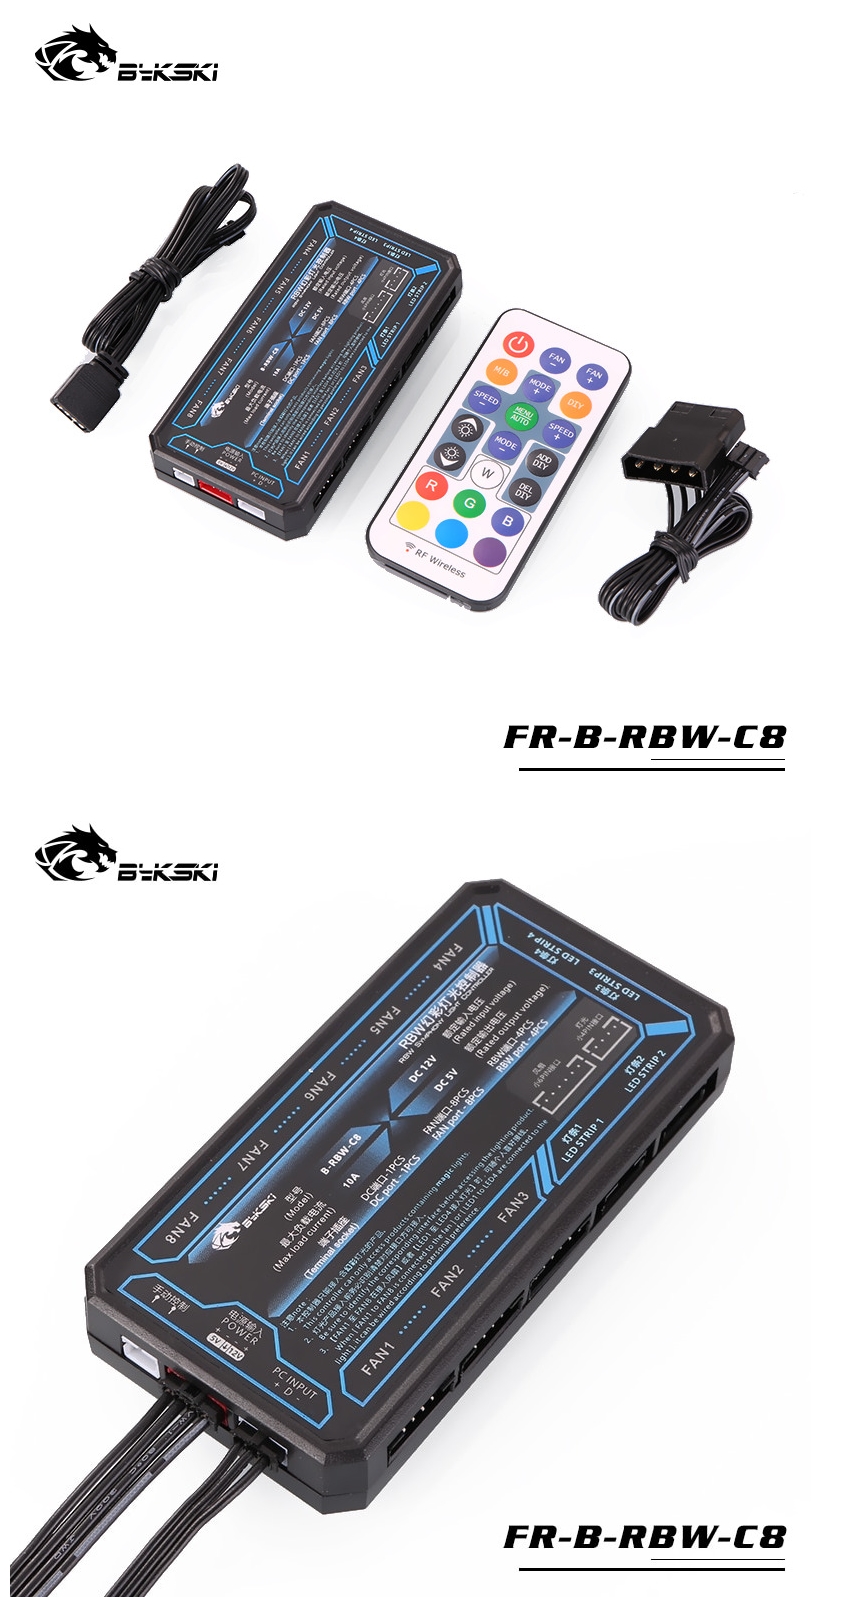 A large marketing image providing additional information about the product Bykski RBW Controller And Lighting Pack (V5) - Additional alt info not provided